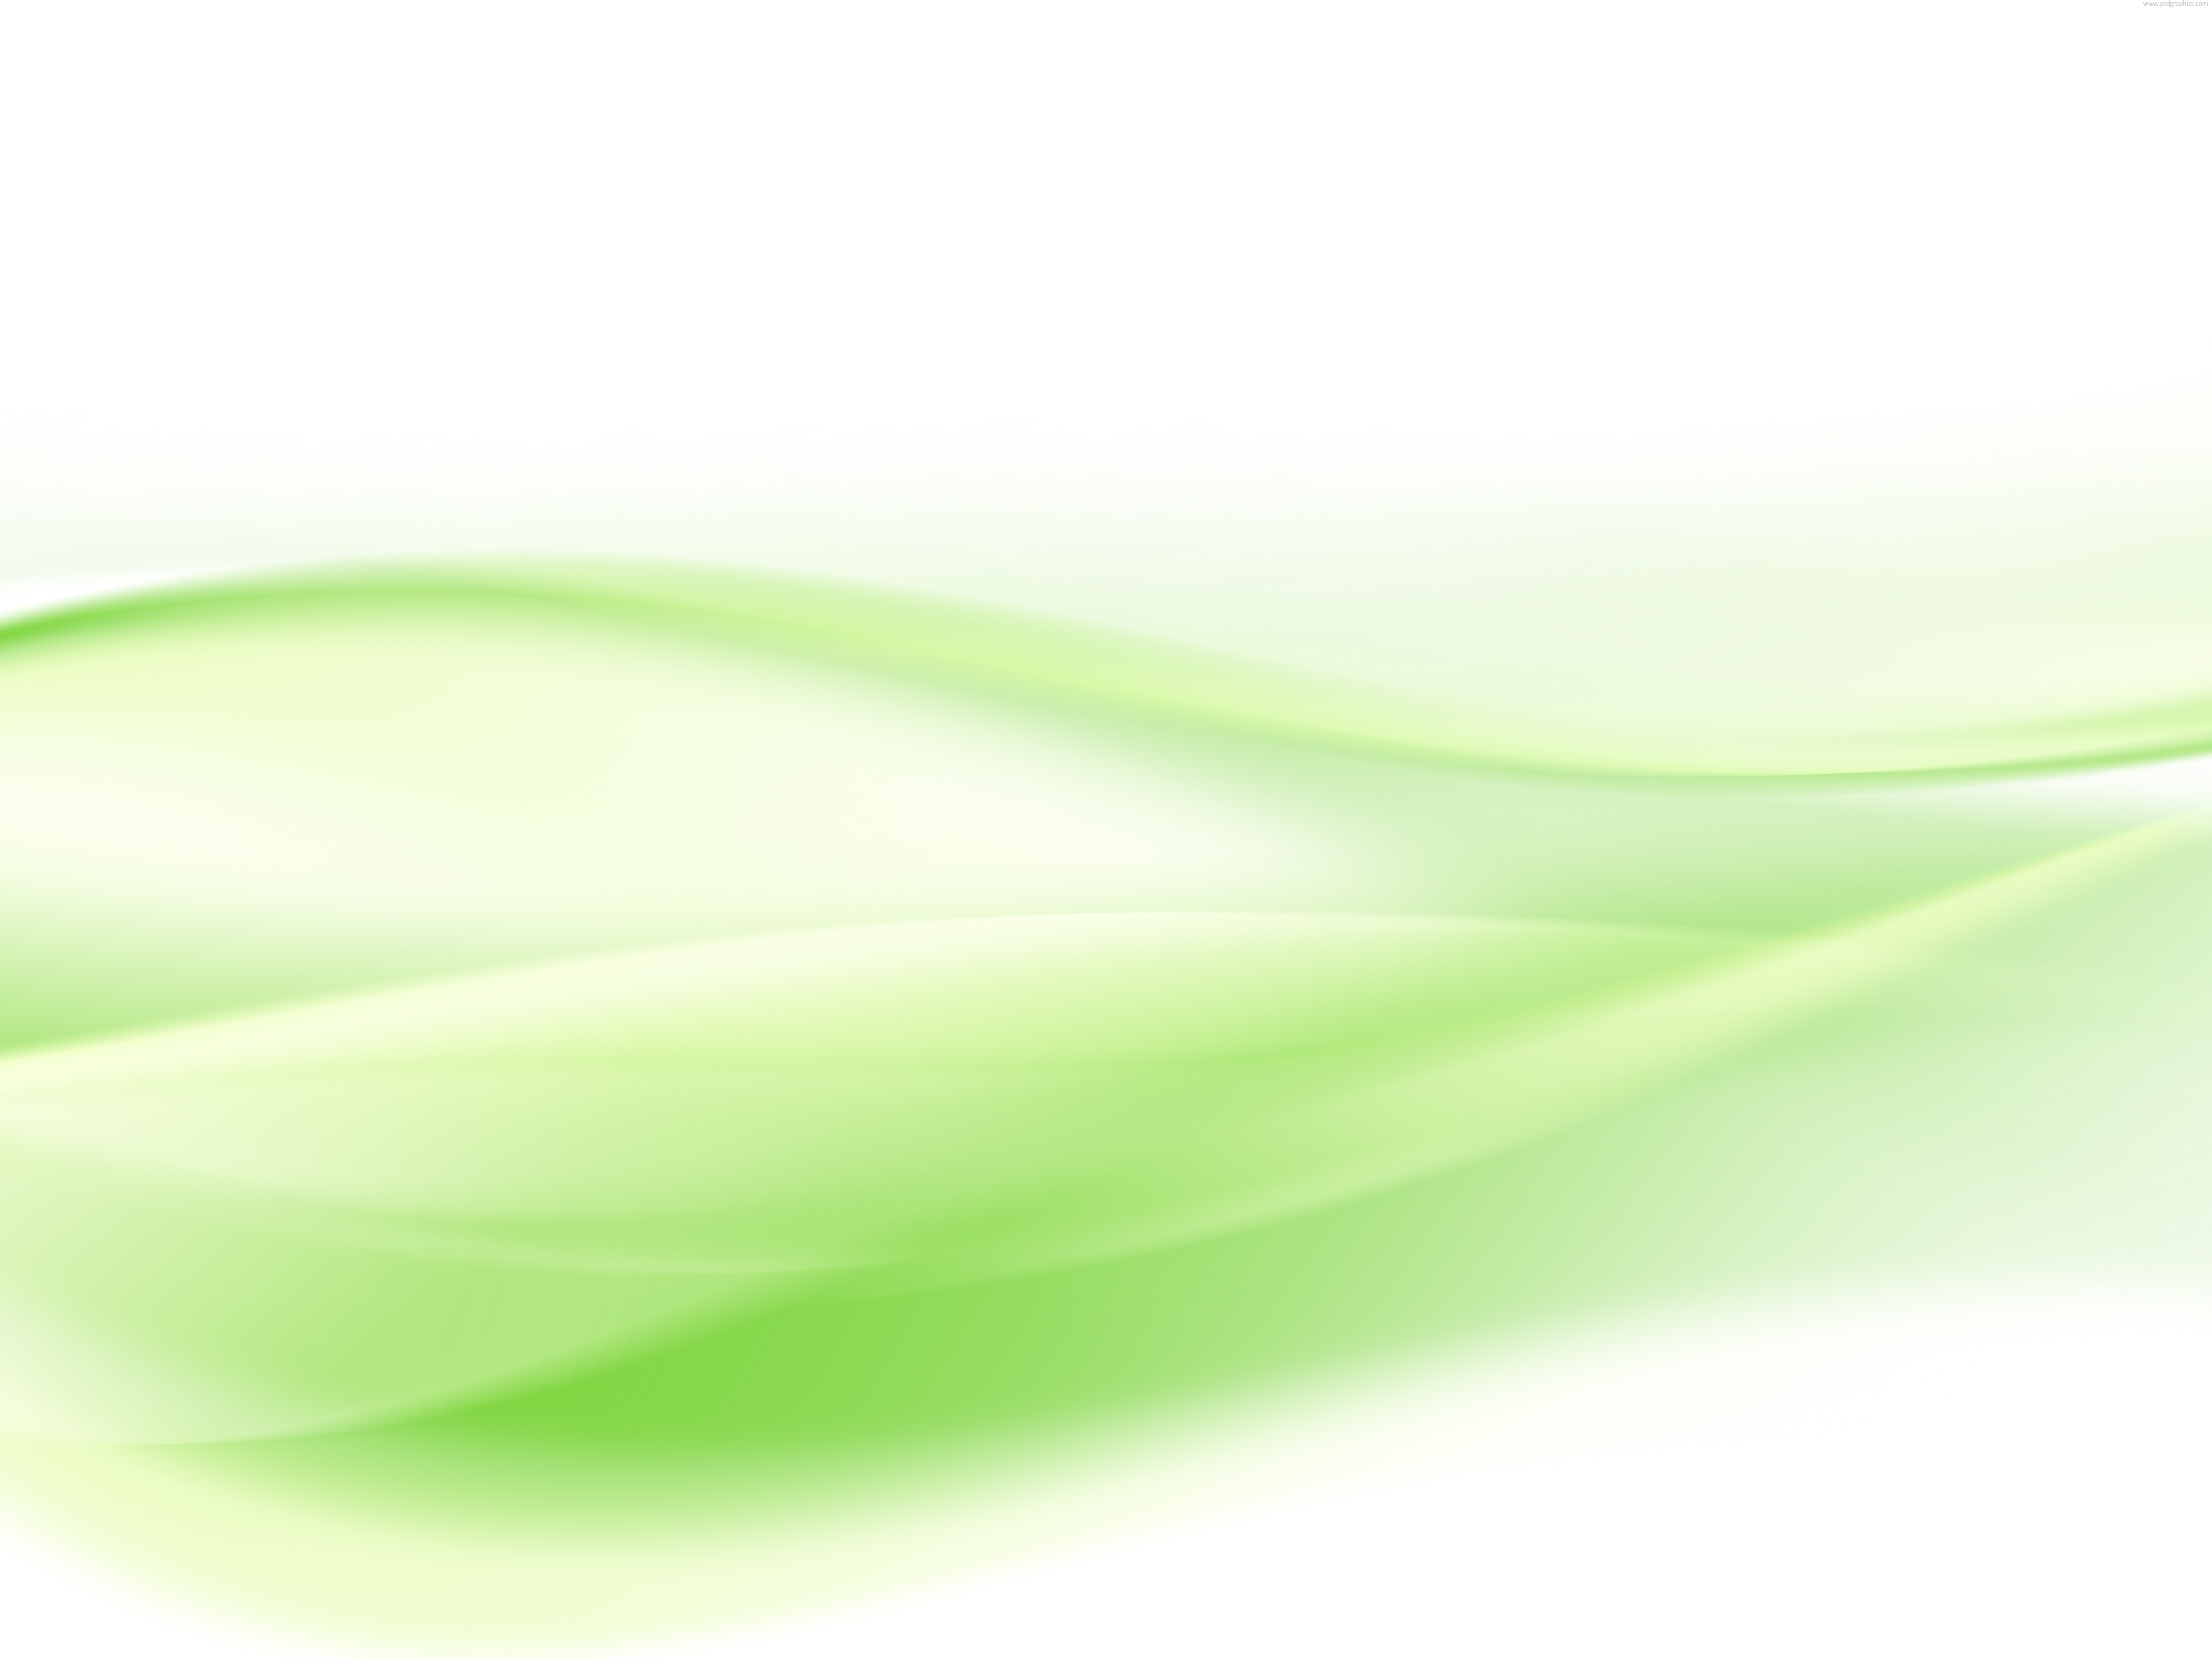 Light Green Waves Background High Graphic